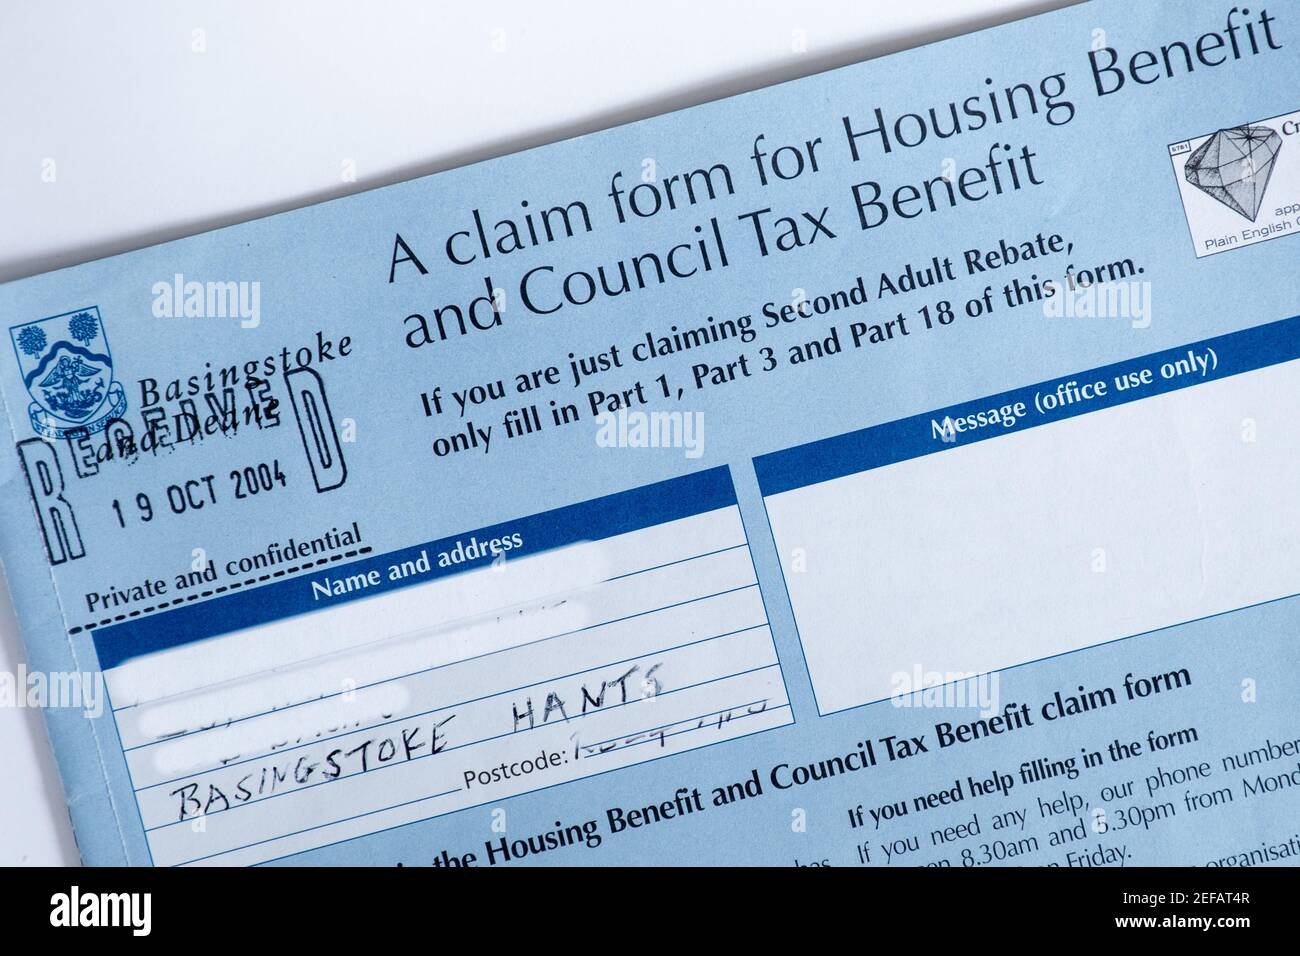 A claim form for housing benefit and council tax benefit, England, UK Stock Photo